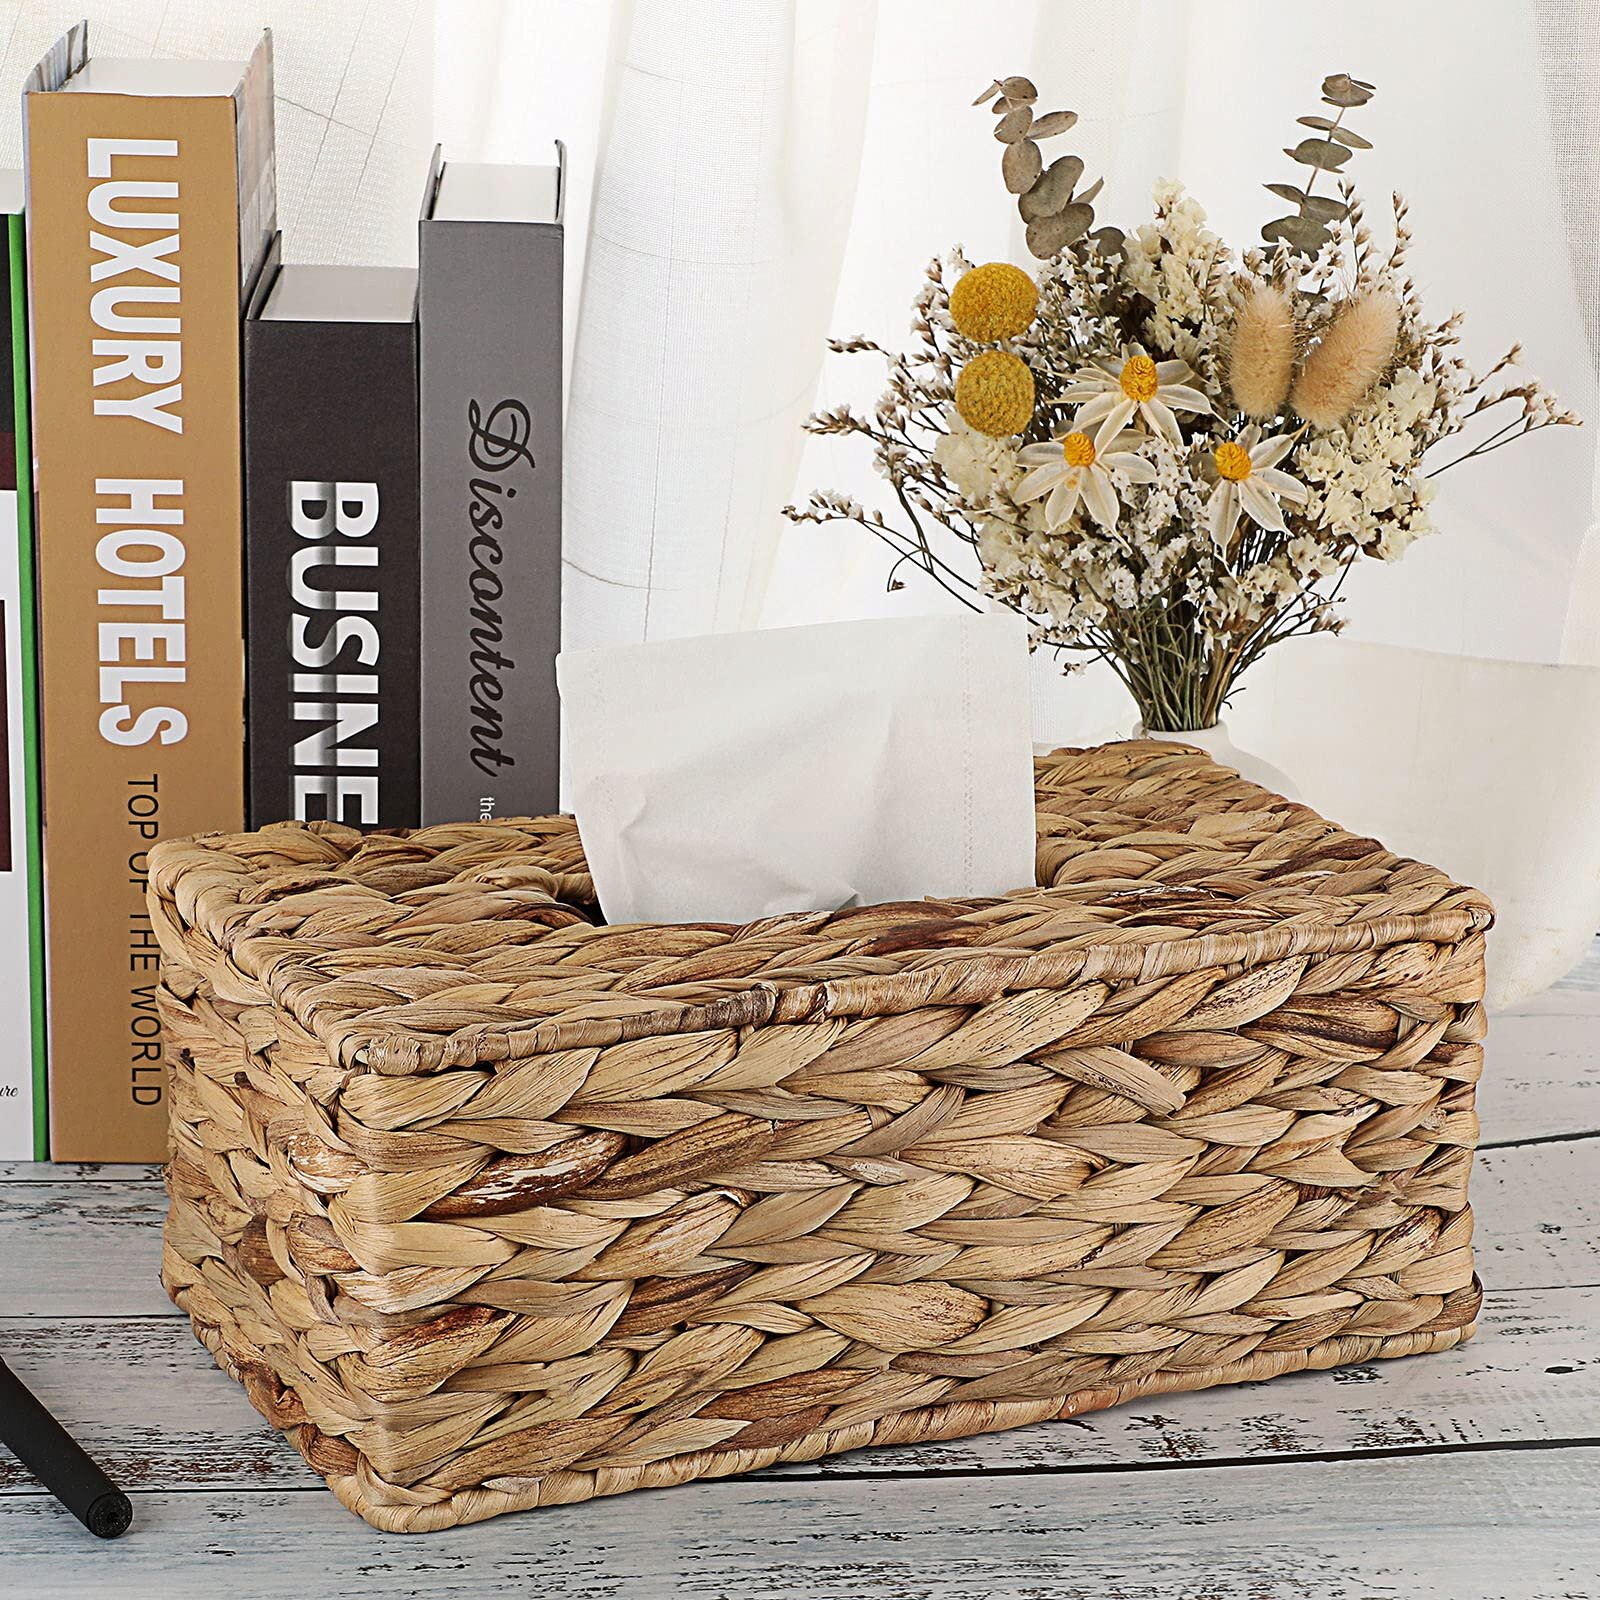 Woven Seagrass Tissue Box Cover Napkin Paper Holder Case for Room Car Office 